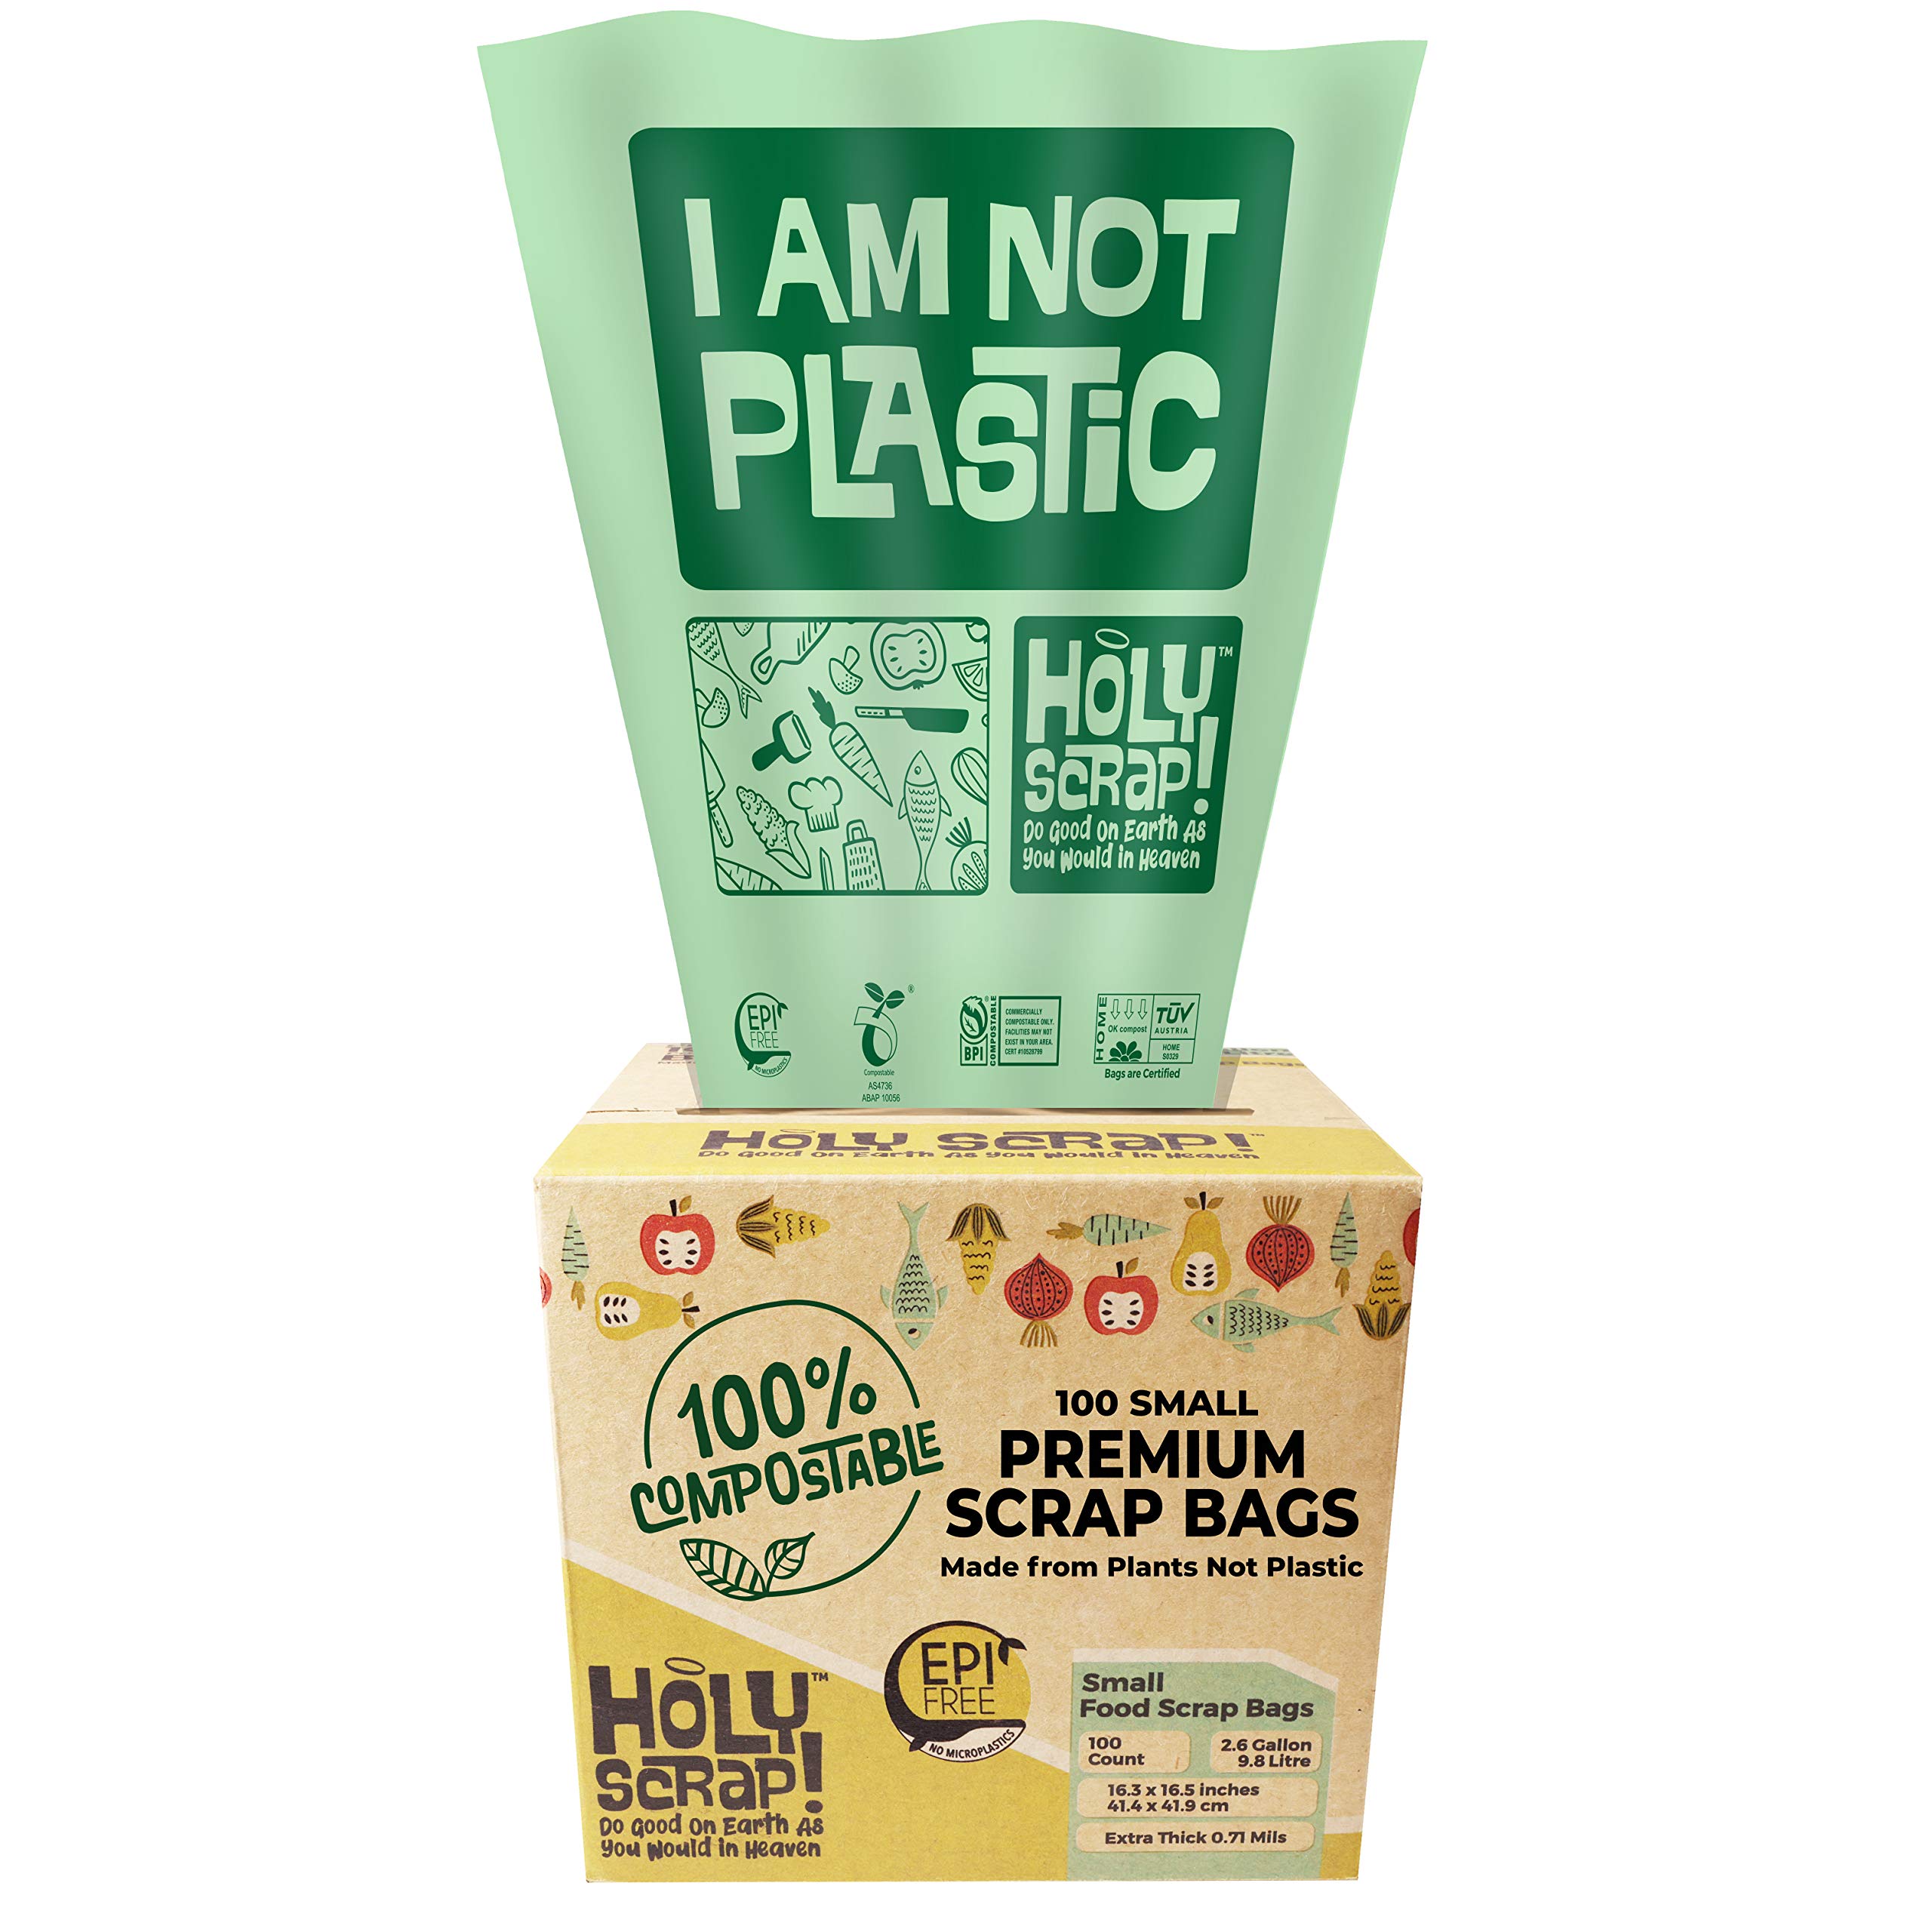 Recycled, Compostable & Eco-friendly Packaging - Made in UK